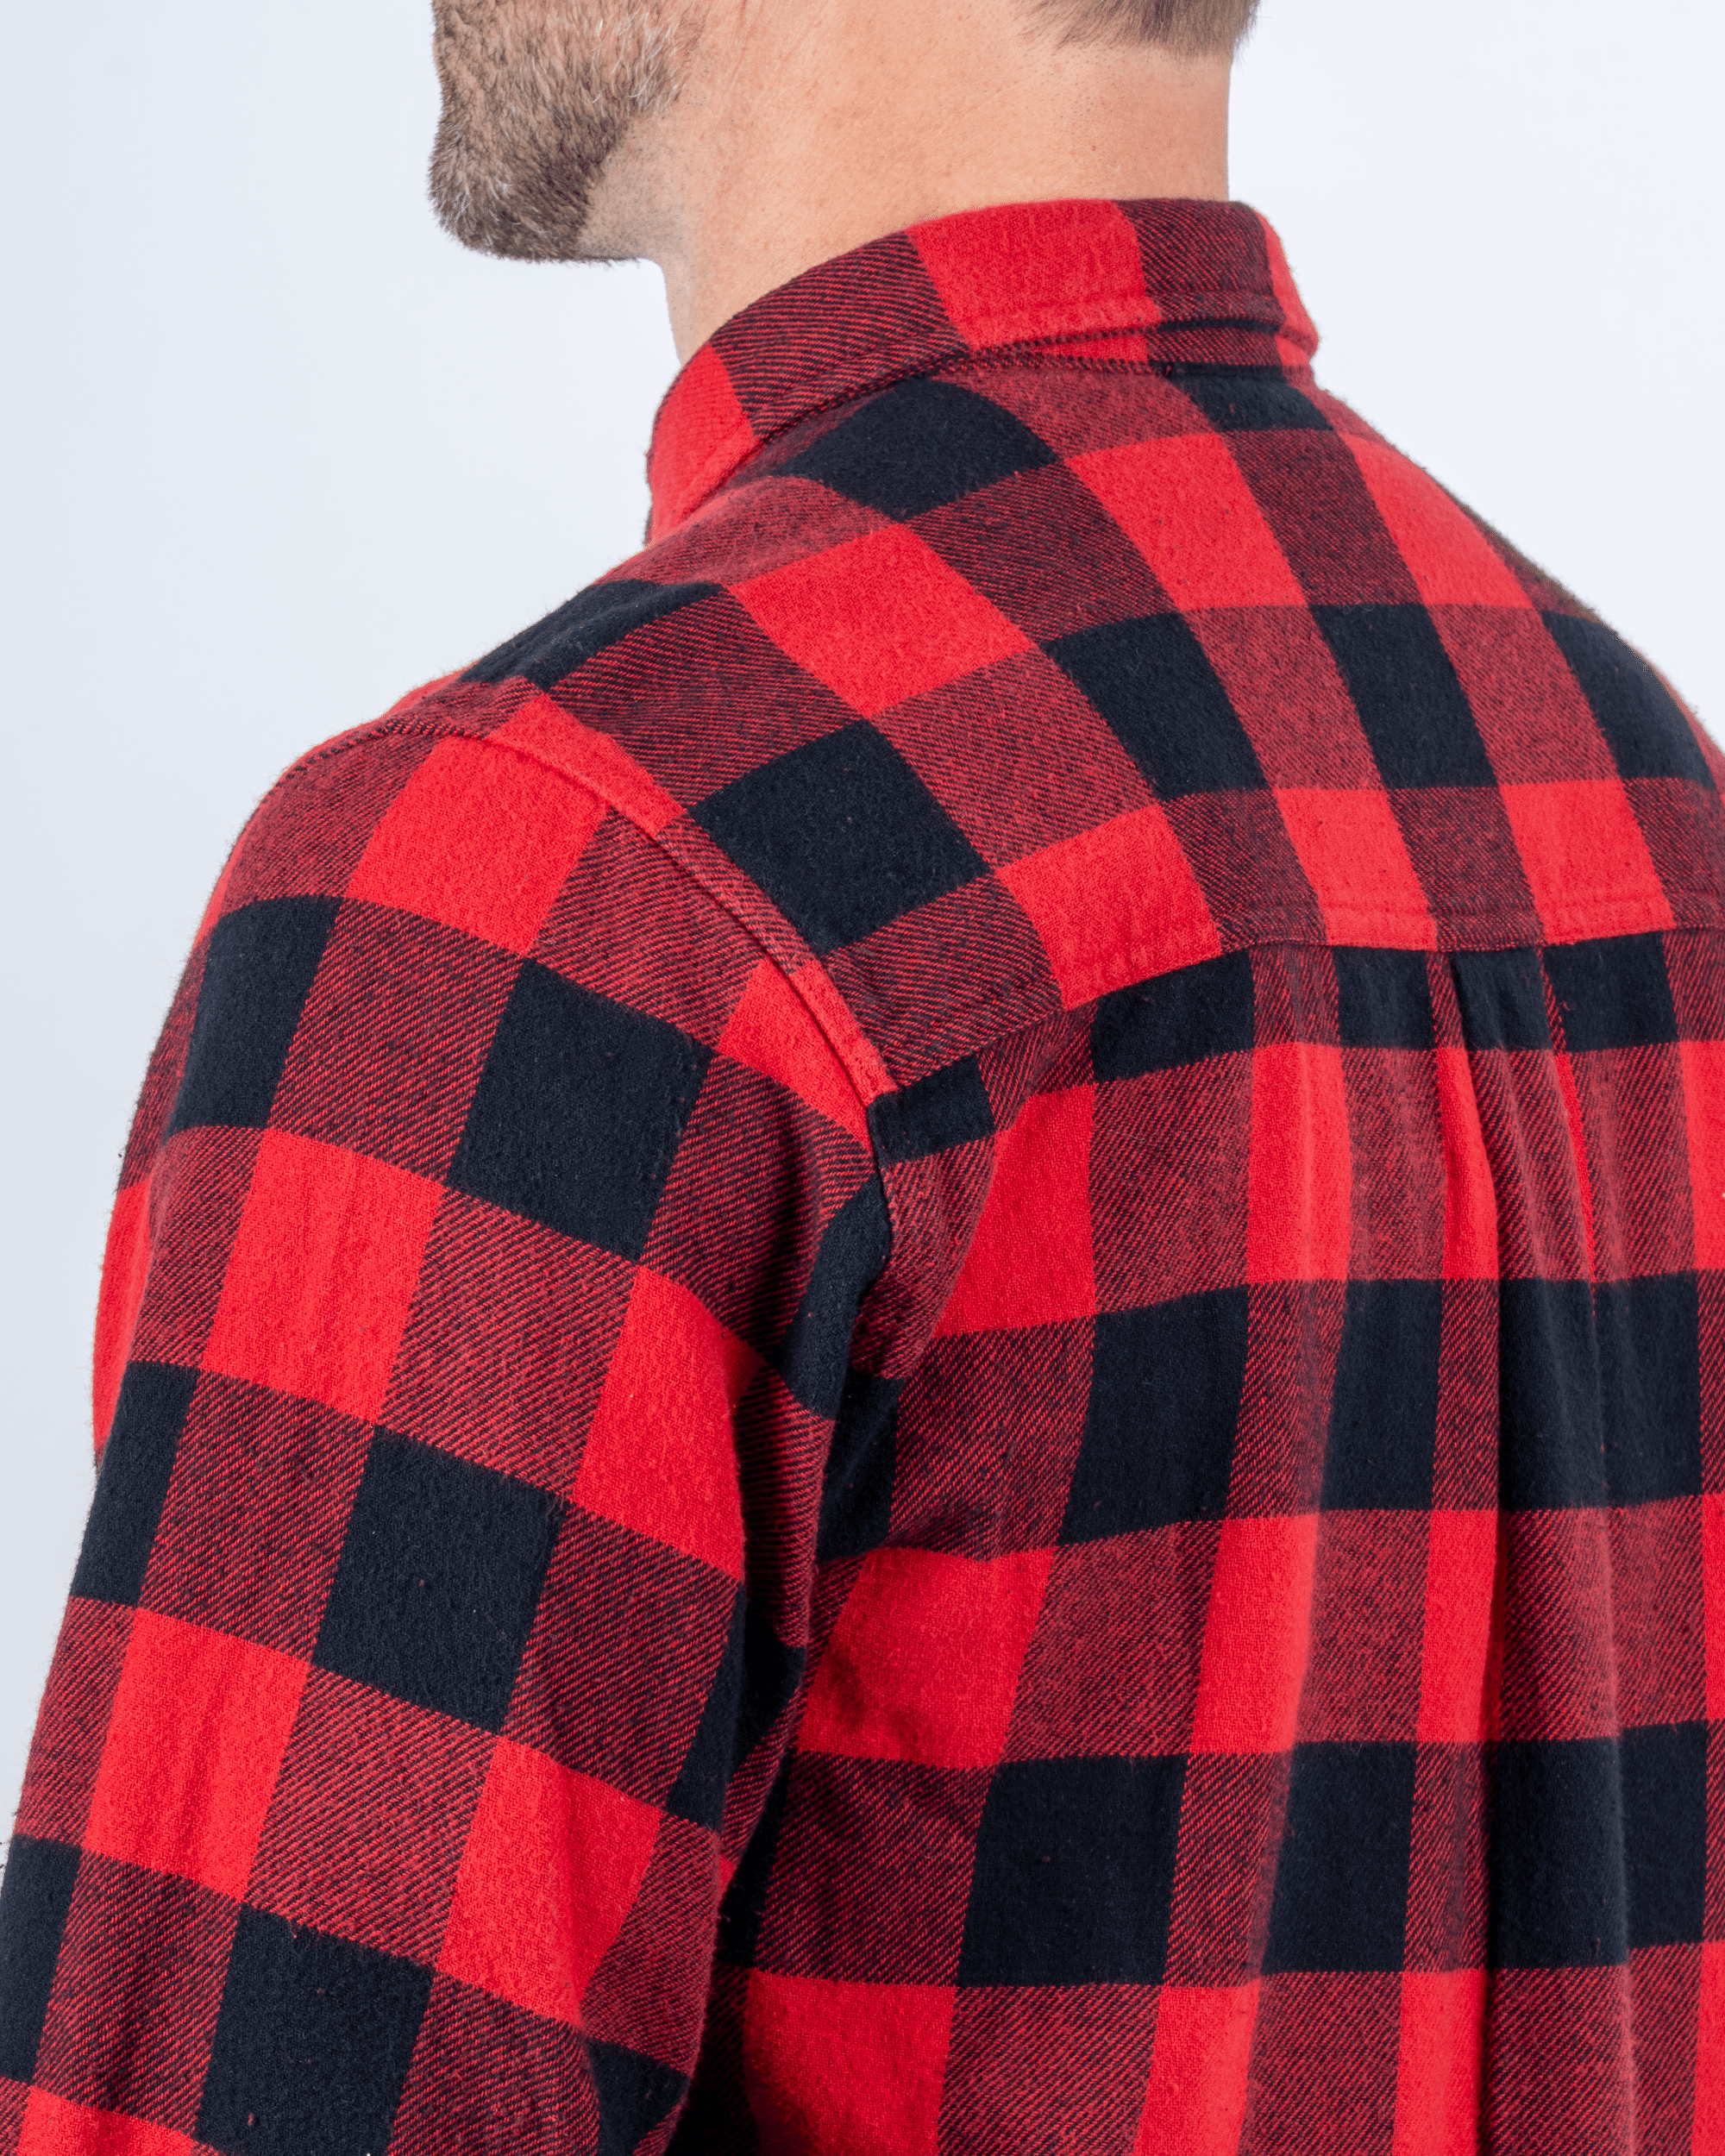 Foreign Rider Co Organic Cotton Red Flannel Plaid 01 Long Sleeve Button Up Shirt Back Shoulder and Collar Detail